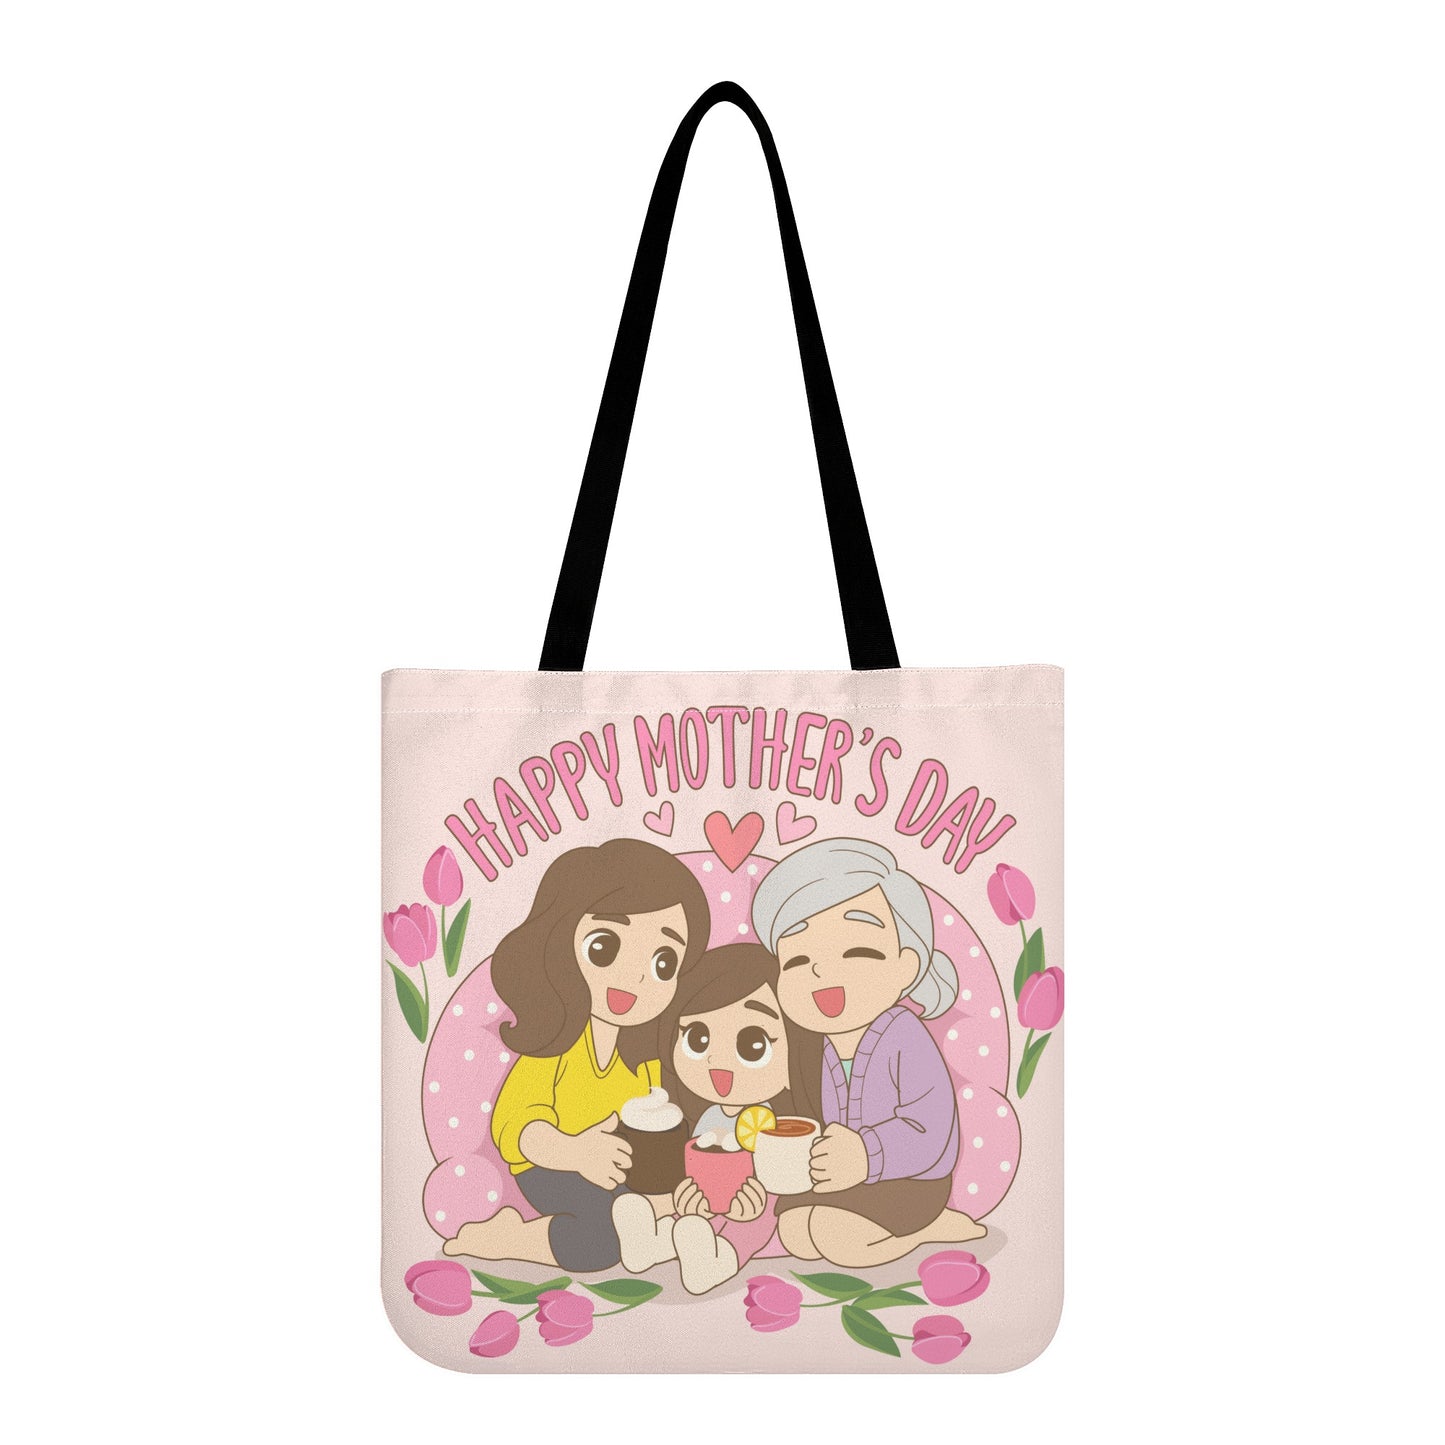 A Sweet on the Go A Cloth Tote Bag To Celebrate the Women You Call Mom